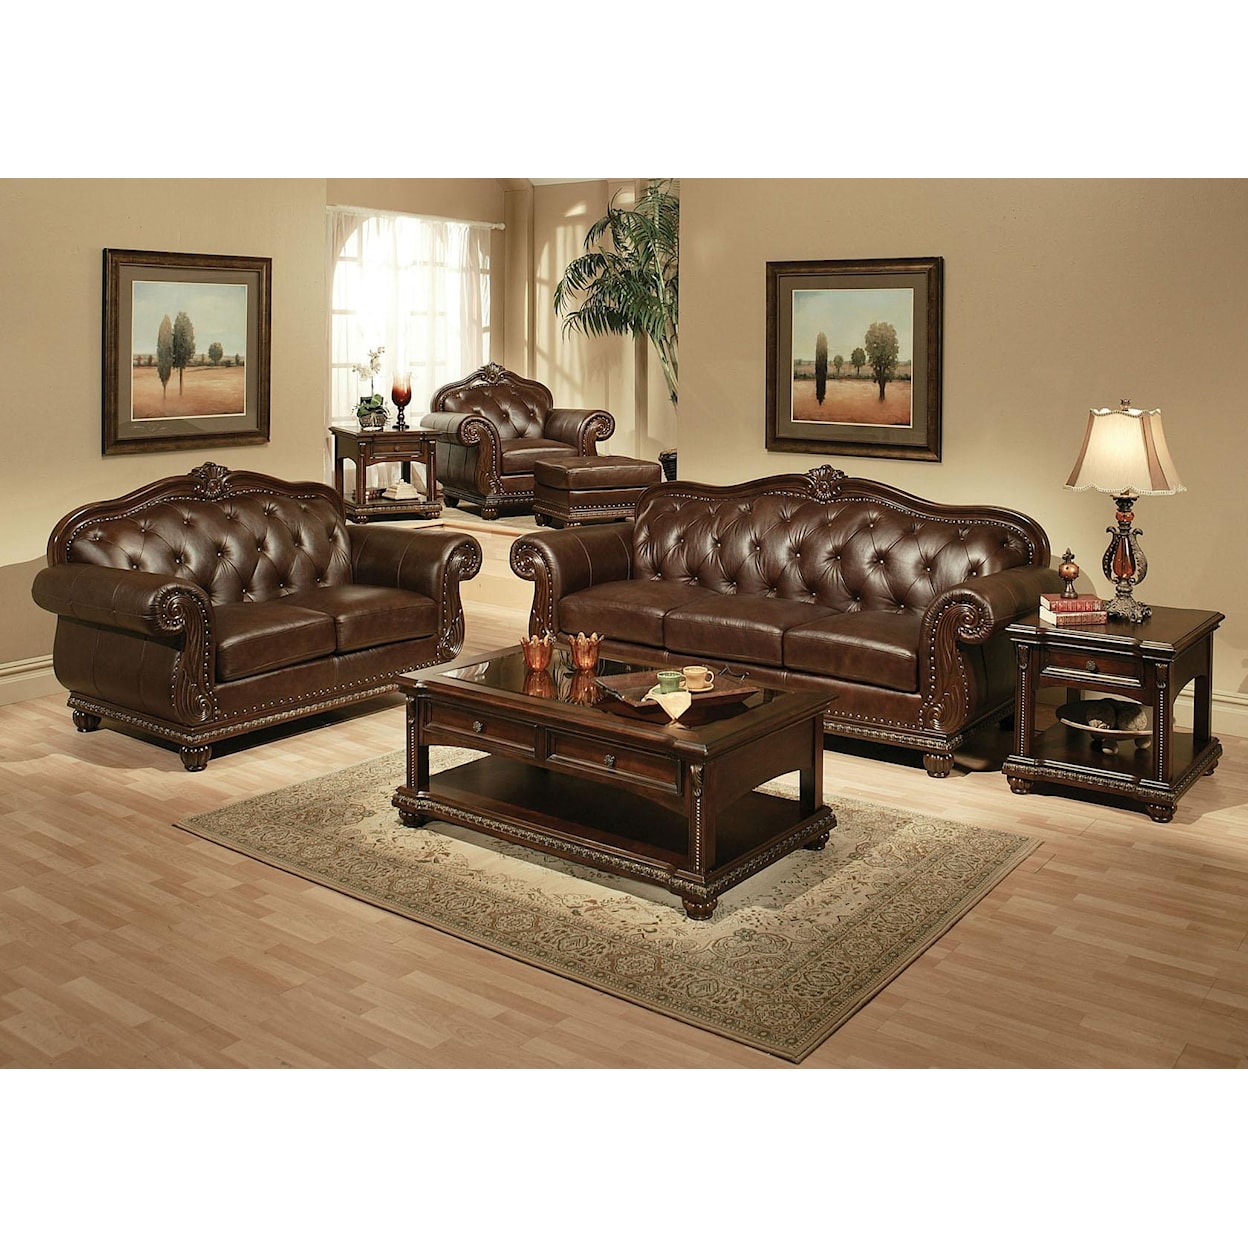 Acme Furniture Anondale Stationary Living Room Group